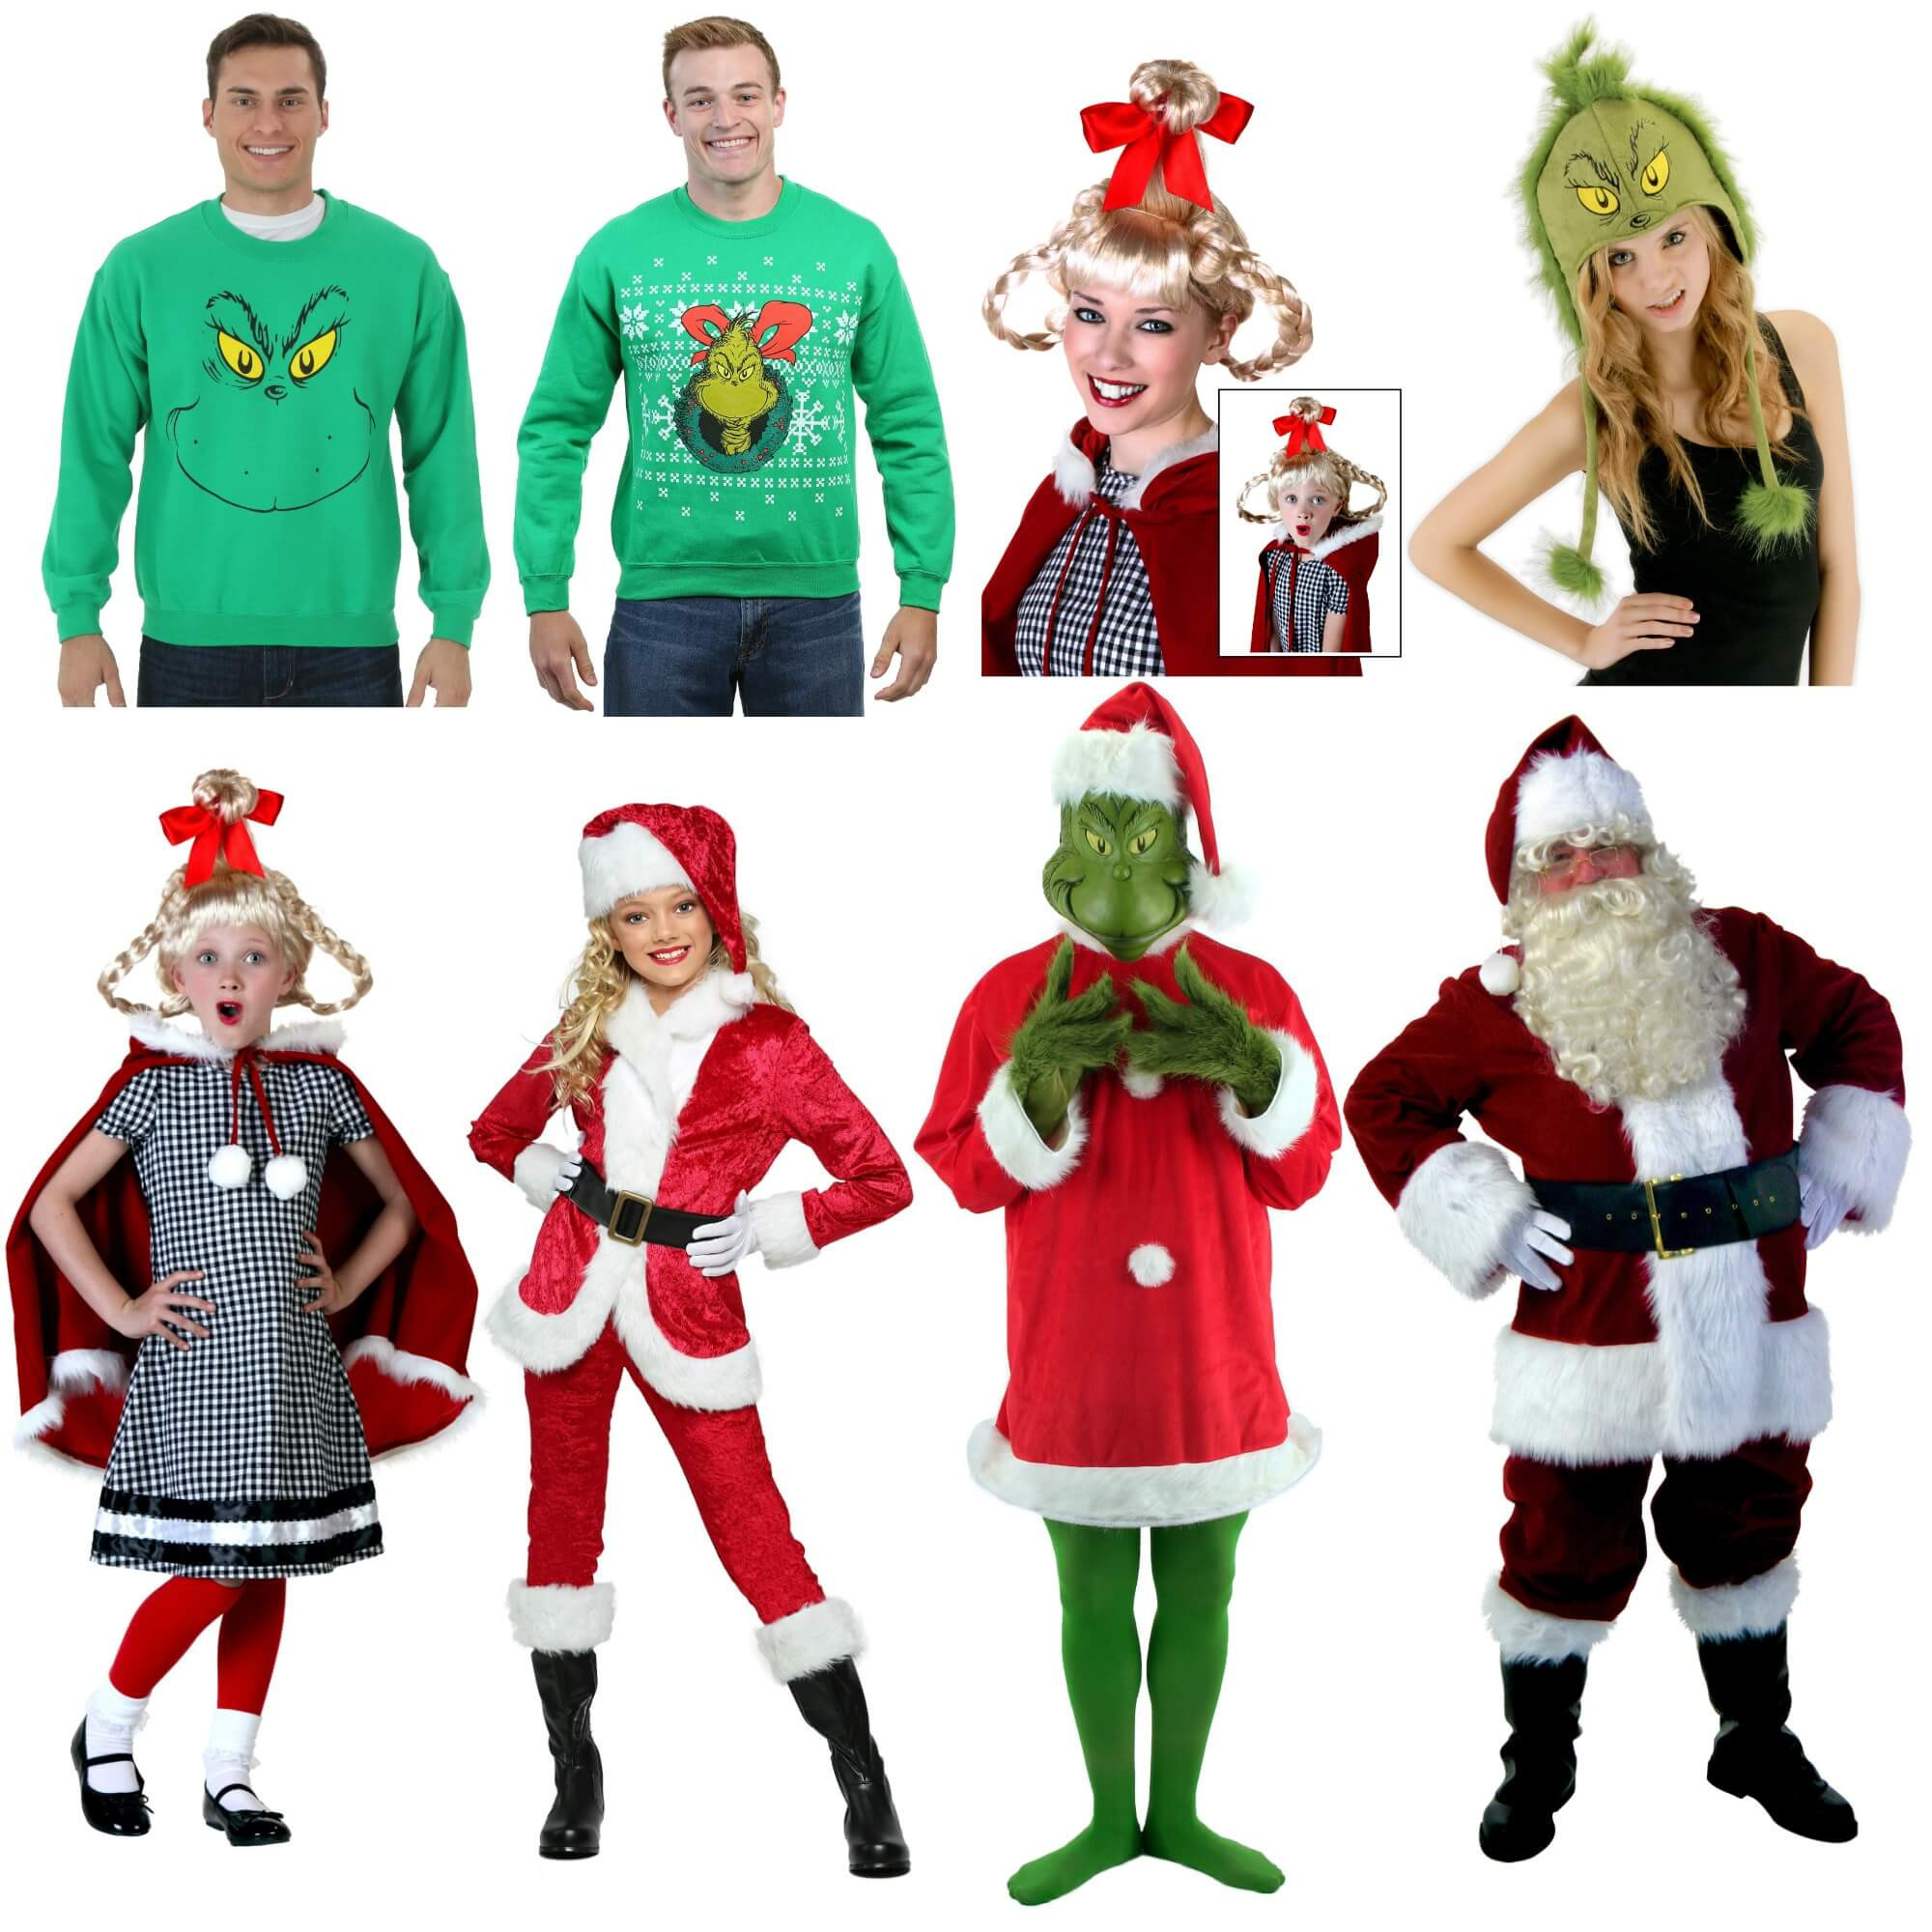 Holiday Party Costume Ideas
 How to Throw a Grinch Costume Party HalloweenCostumes